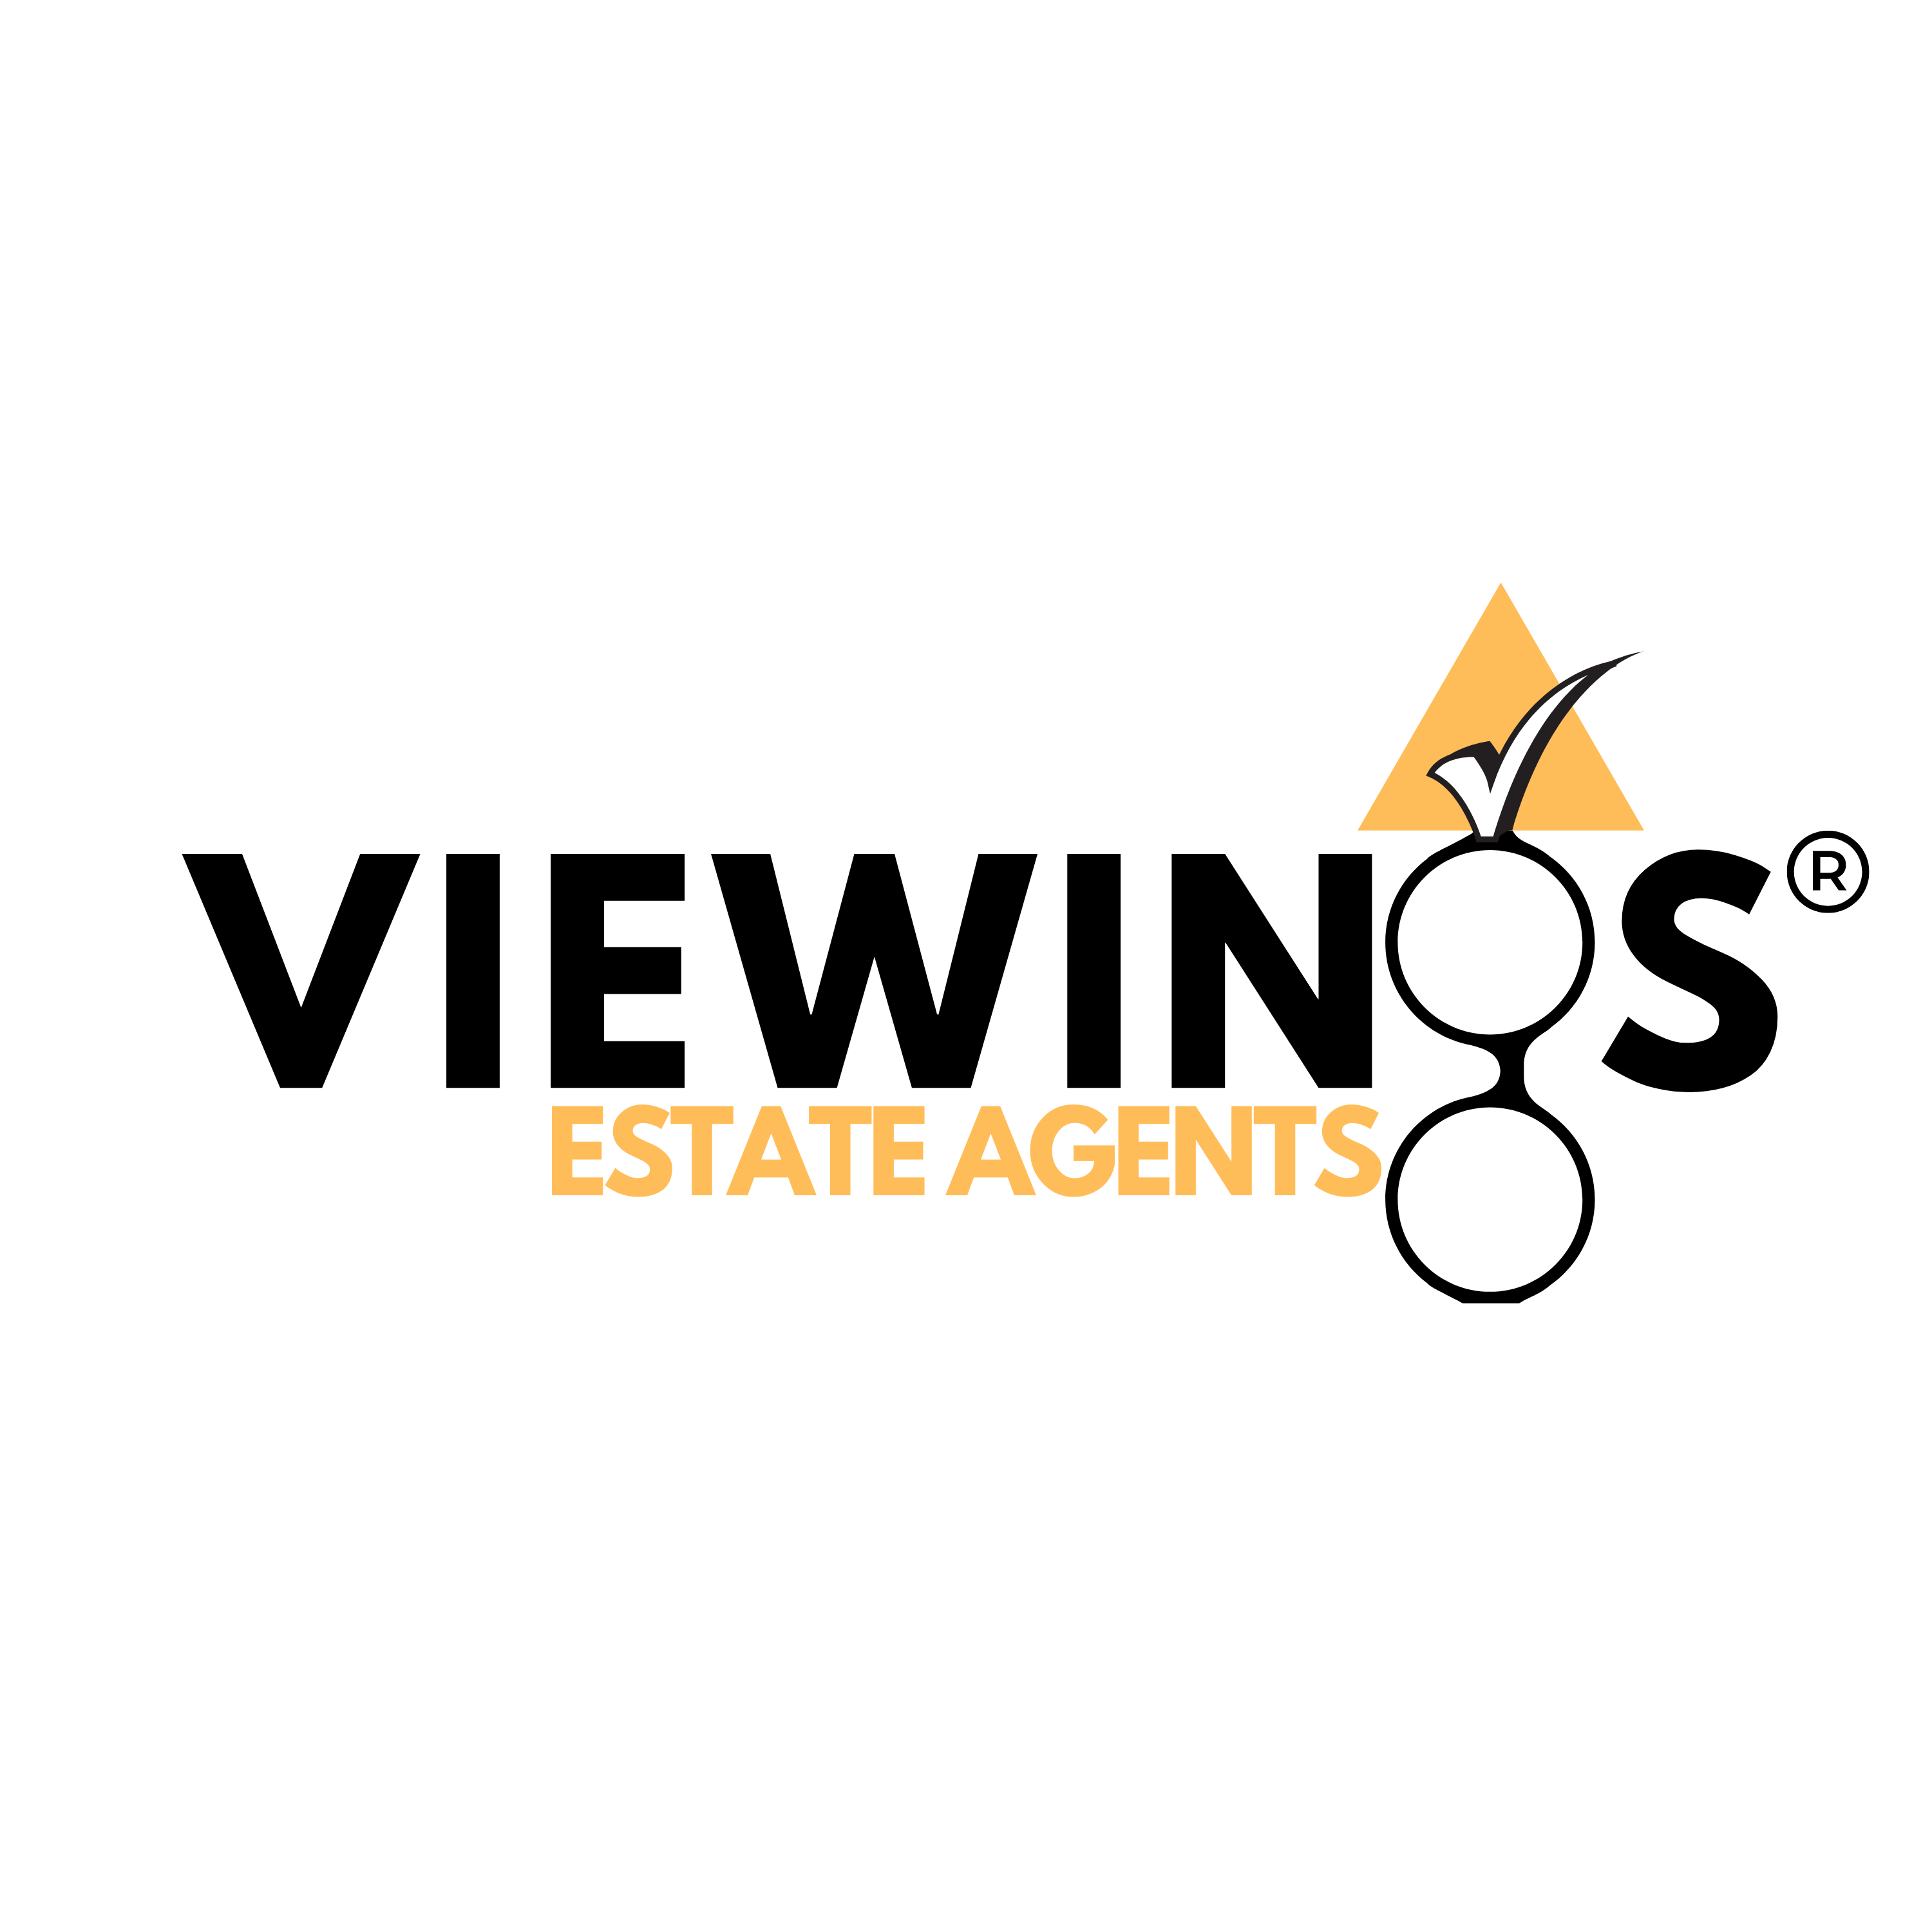 Logo of Viewings Estate Agents